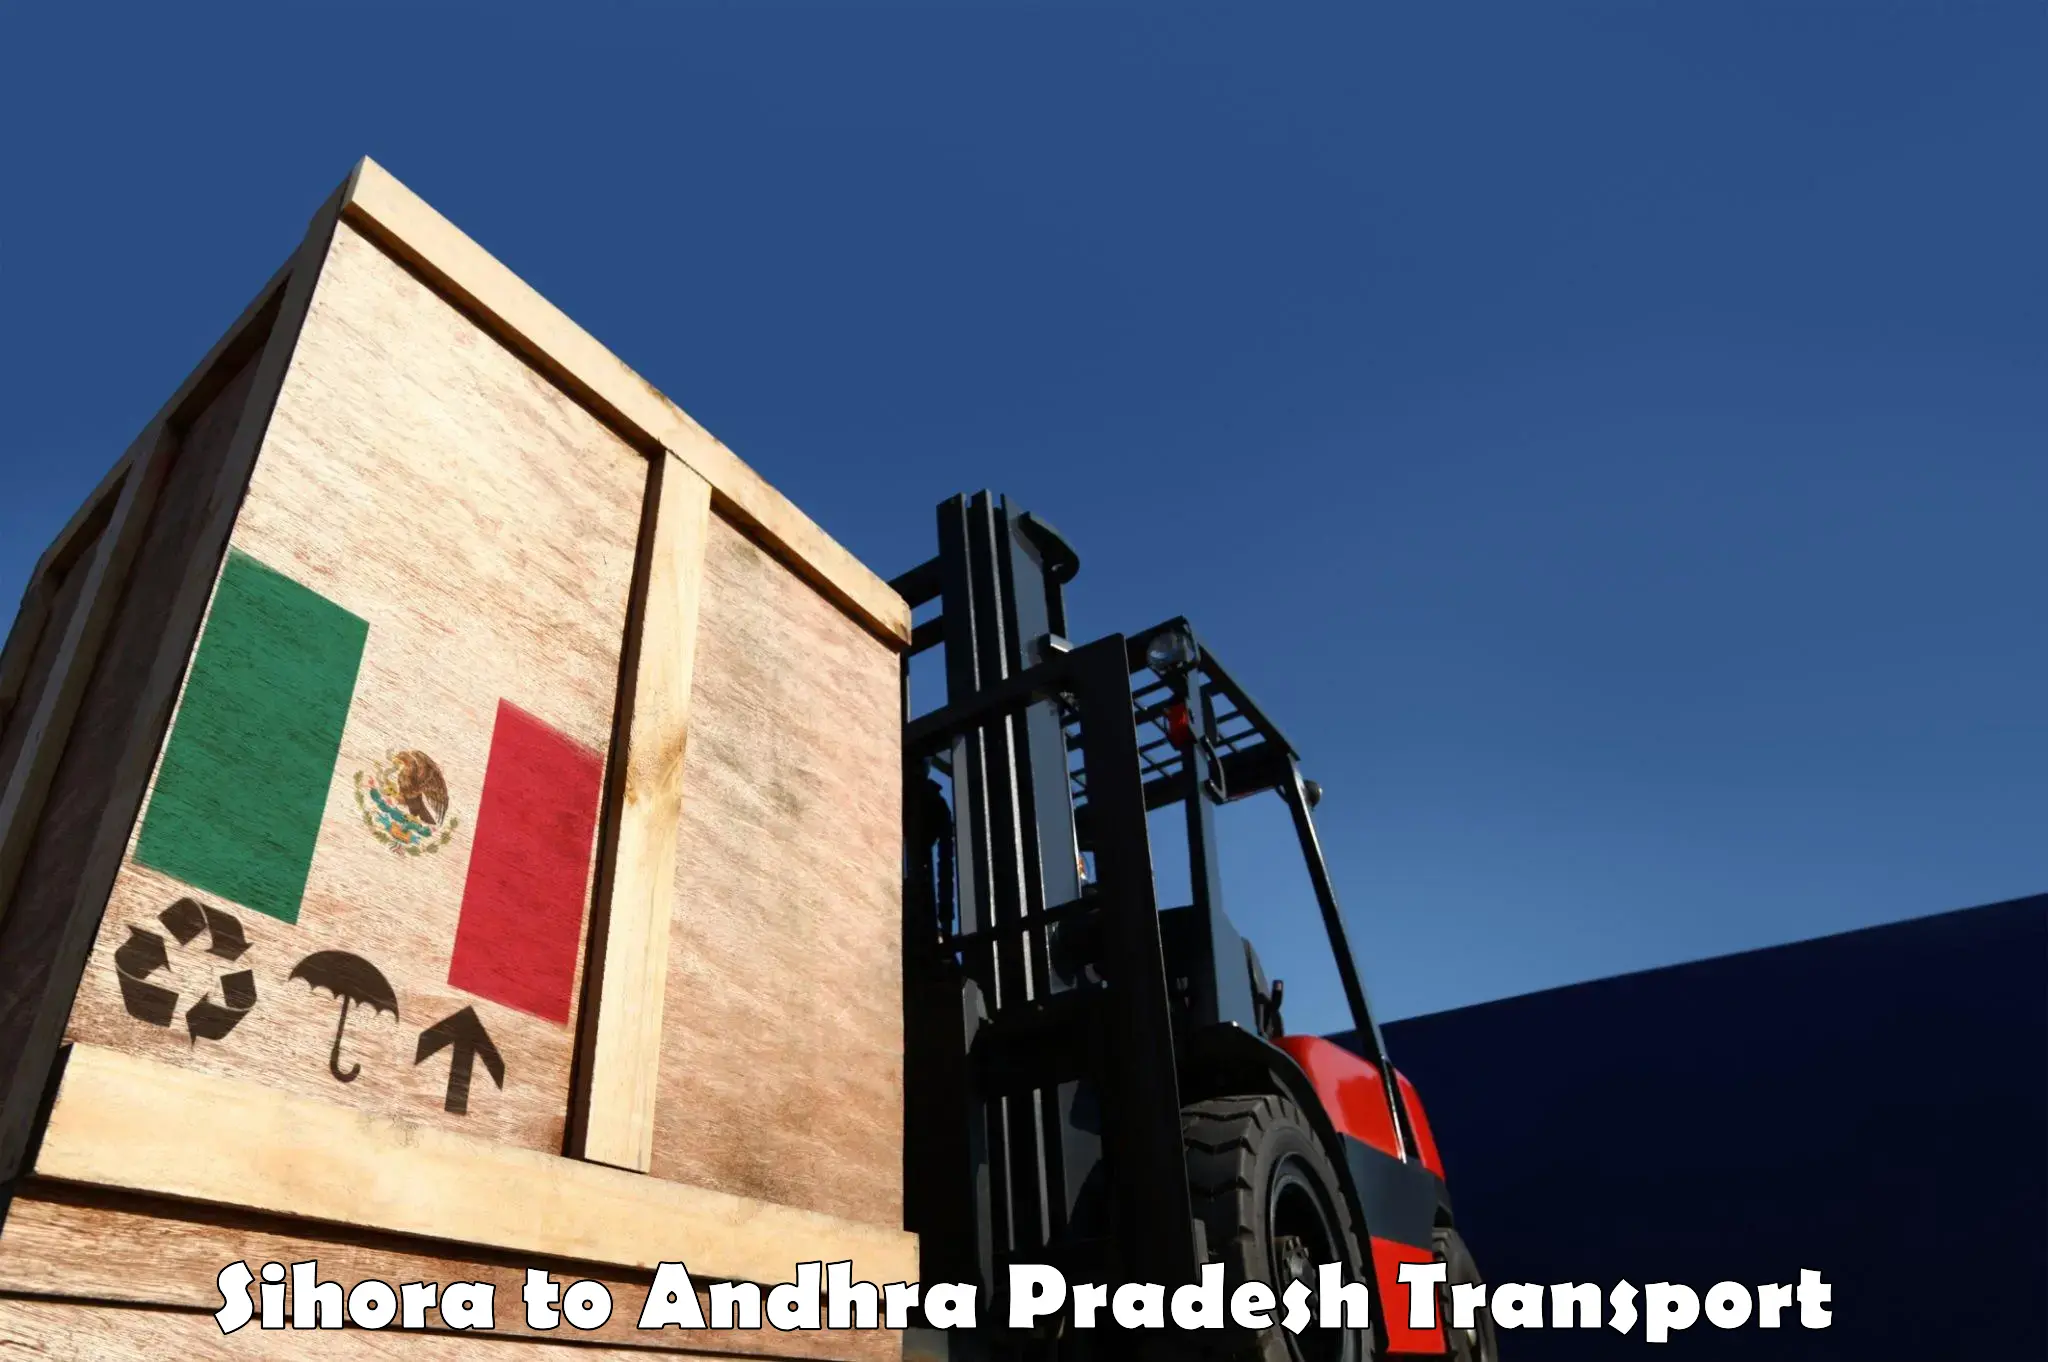 Cargo train transport services in Sihora to Chintalapudi